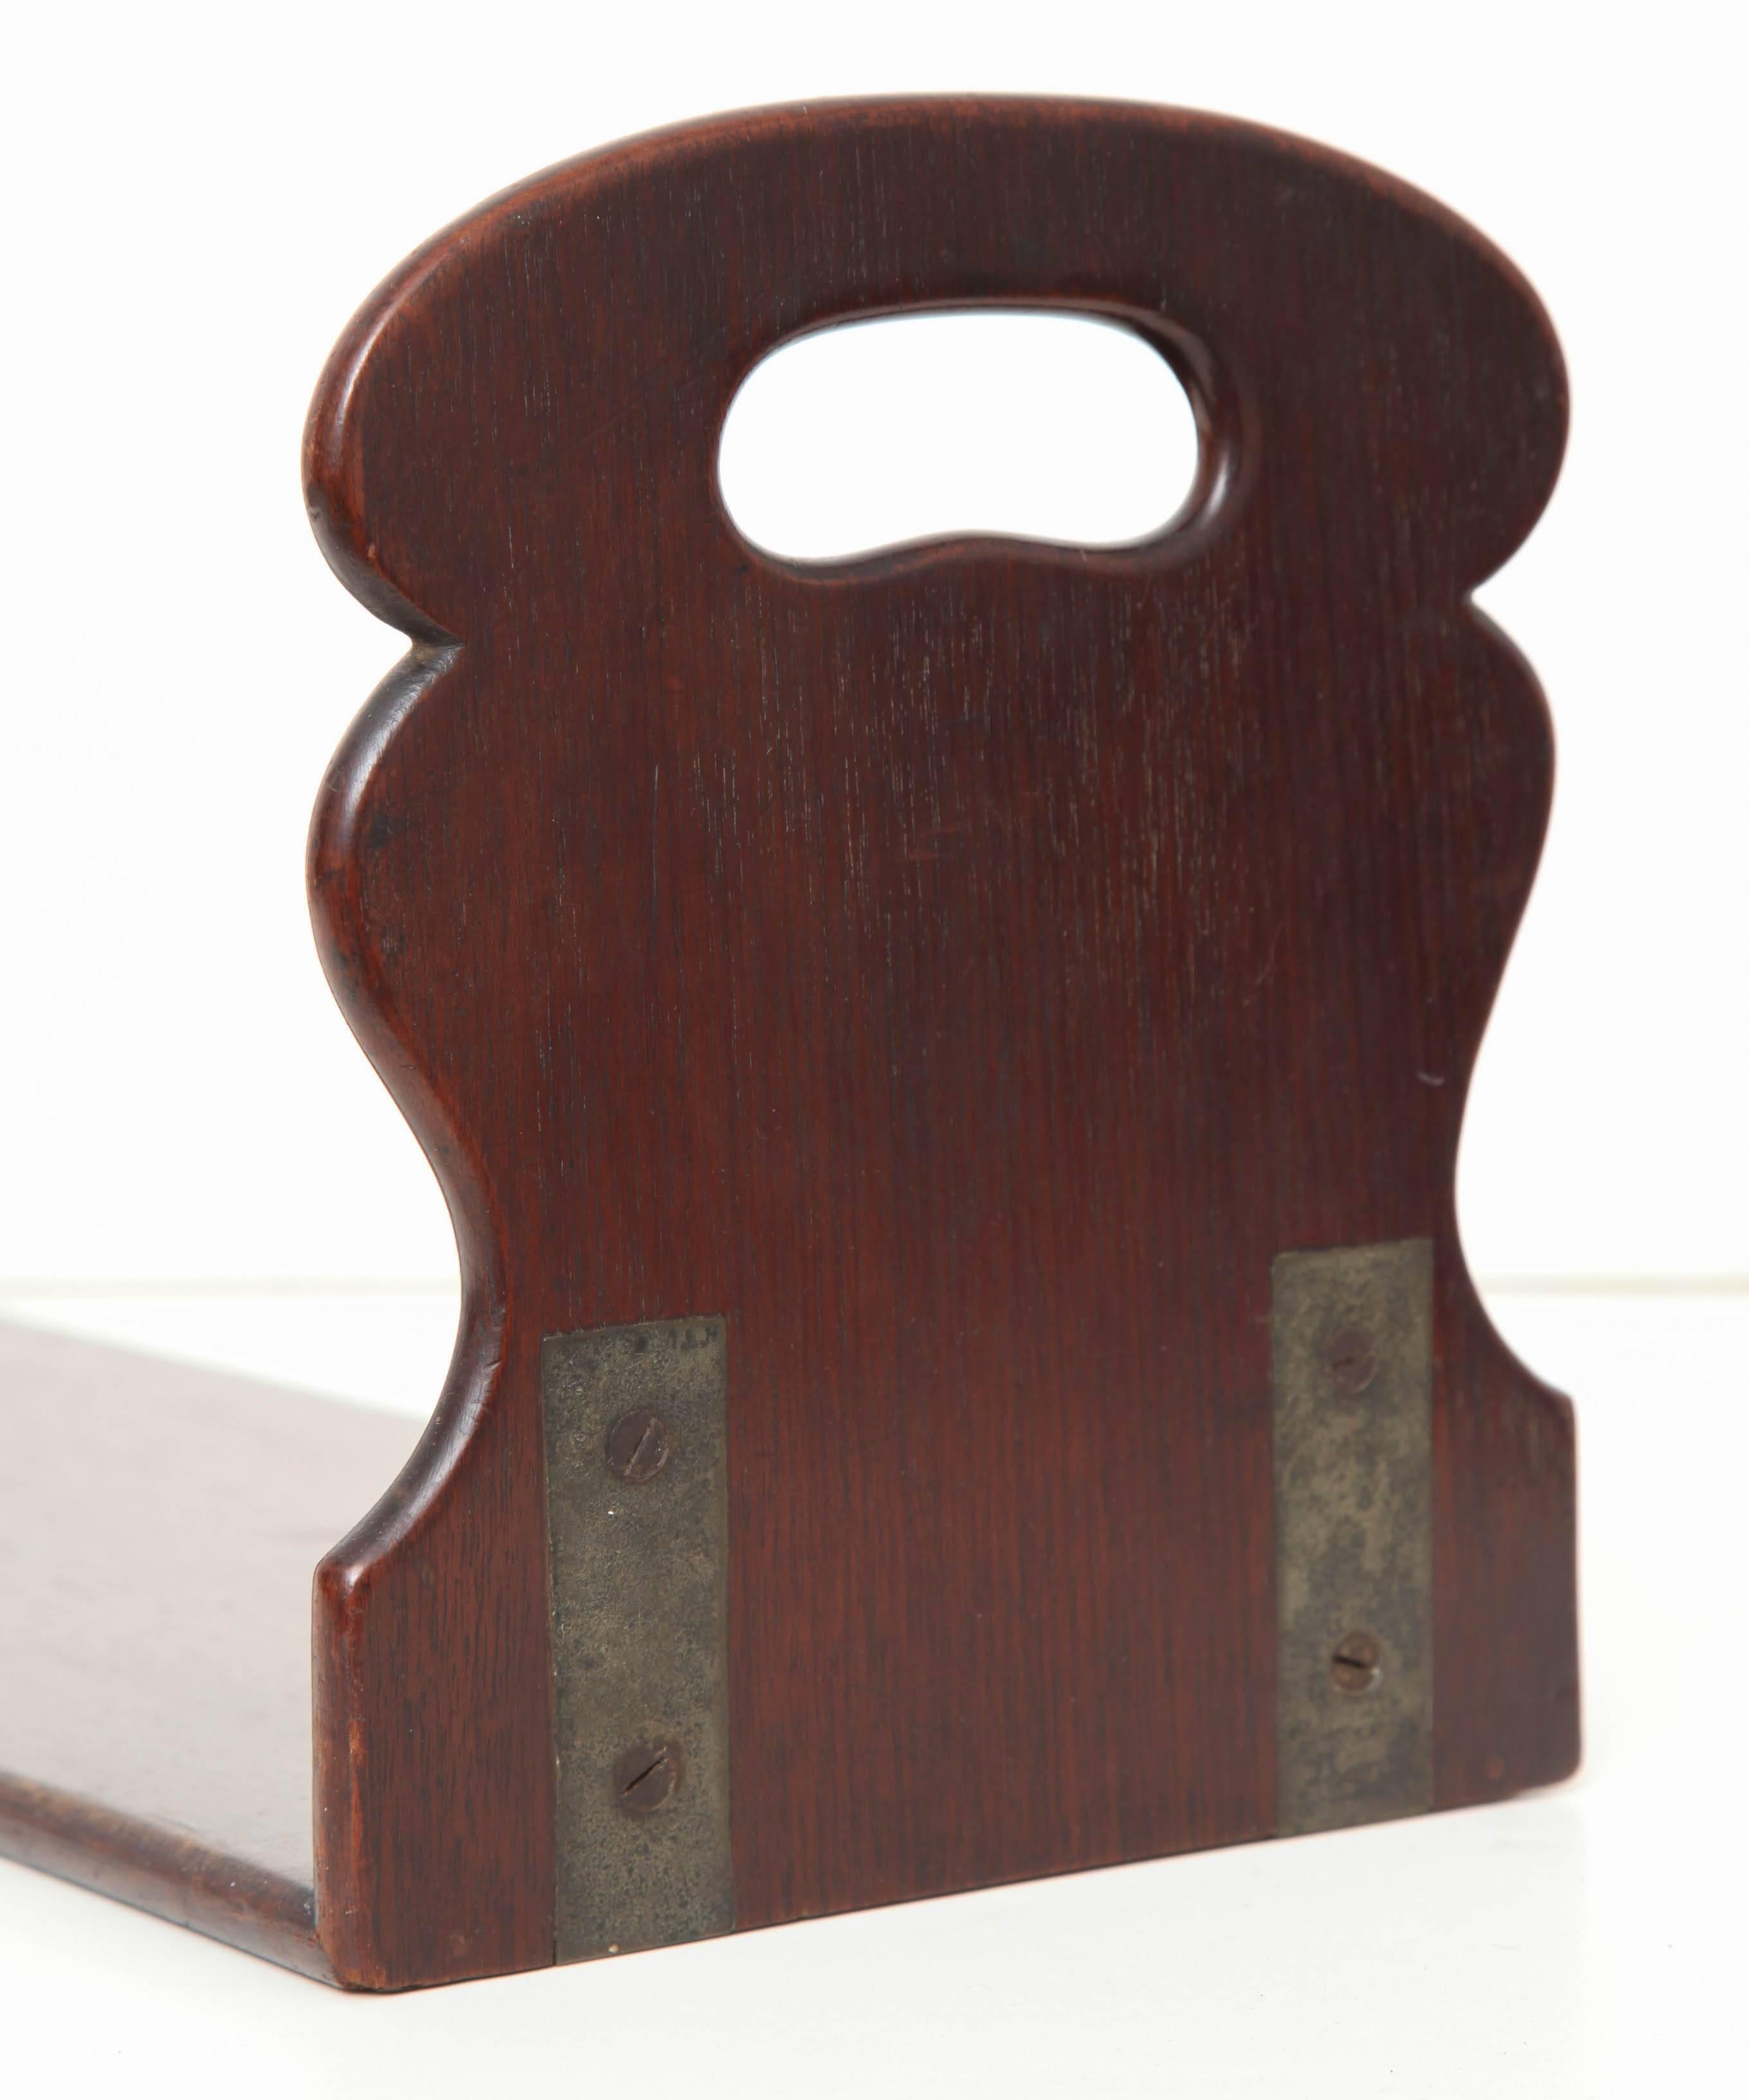 An early 19th century English mahogany book rest with shaped ends and pierced carrying handles.